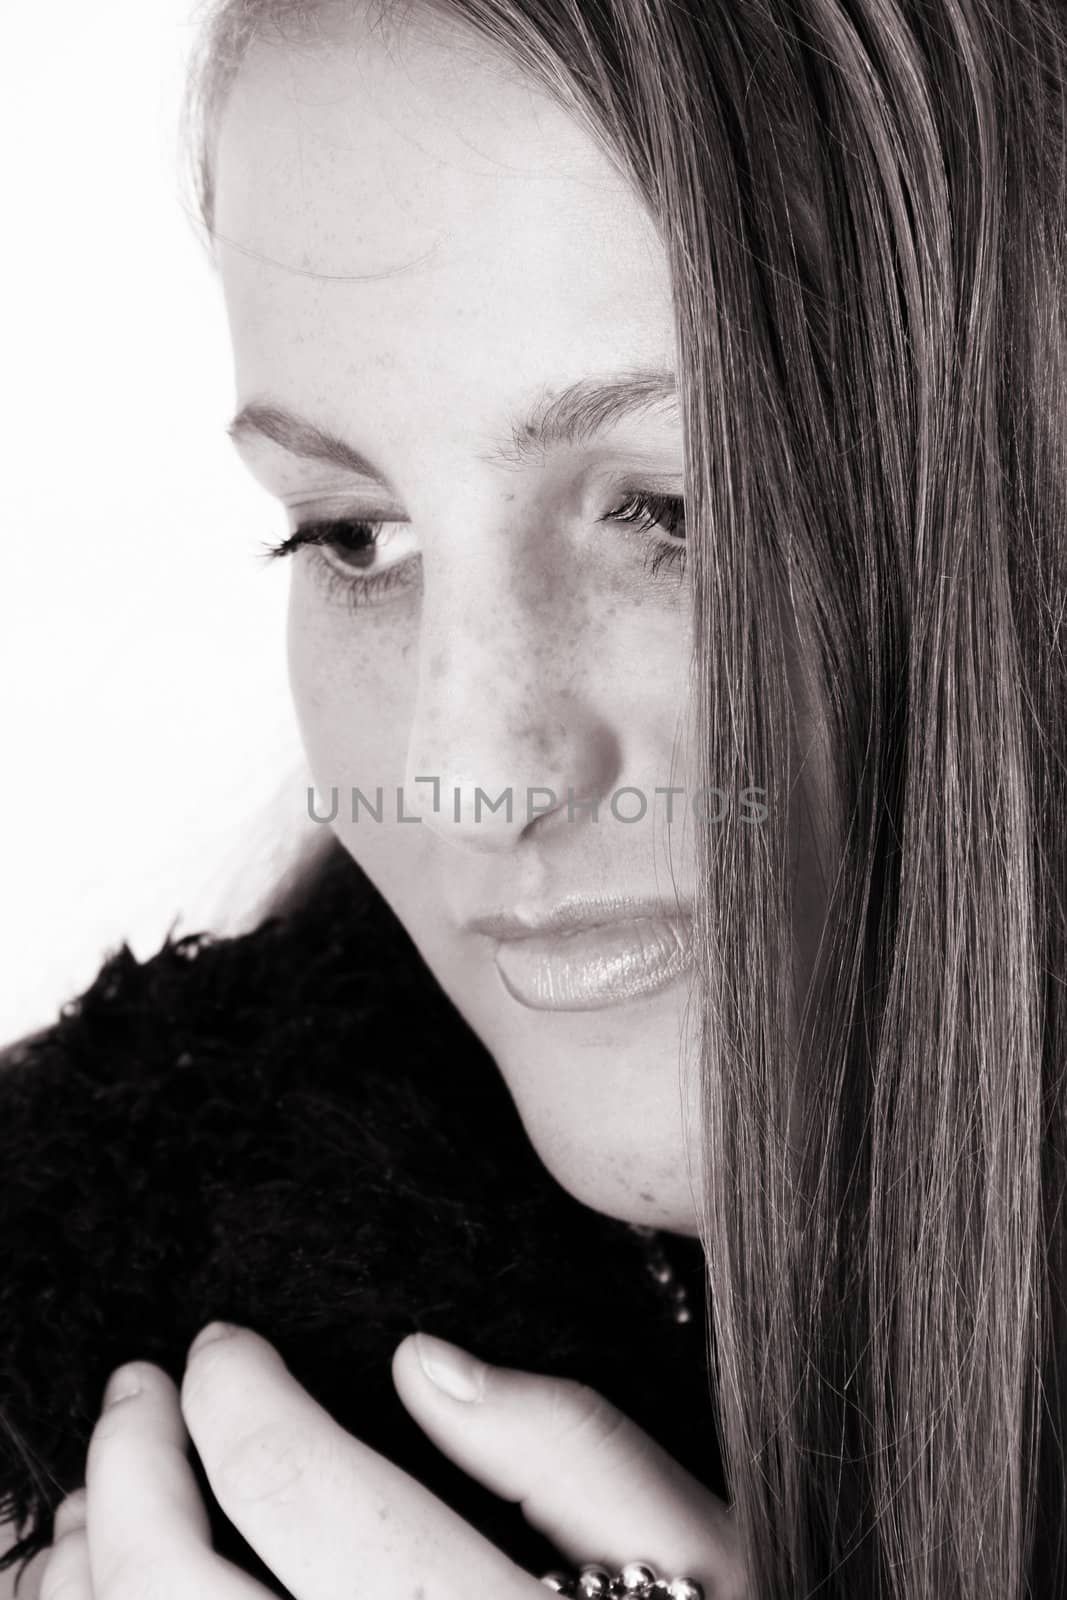 Close up of female teenager against a white background